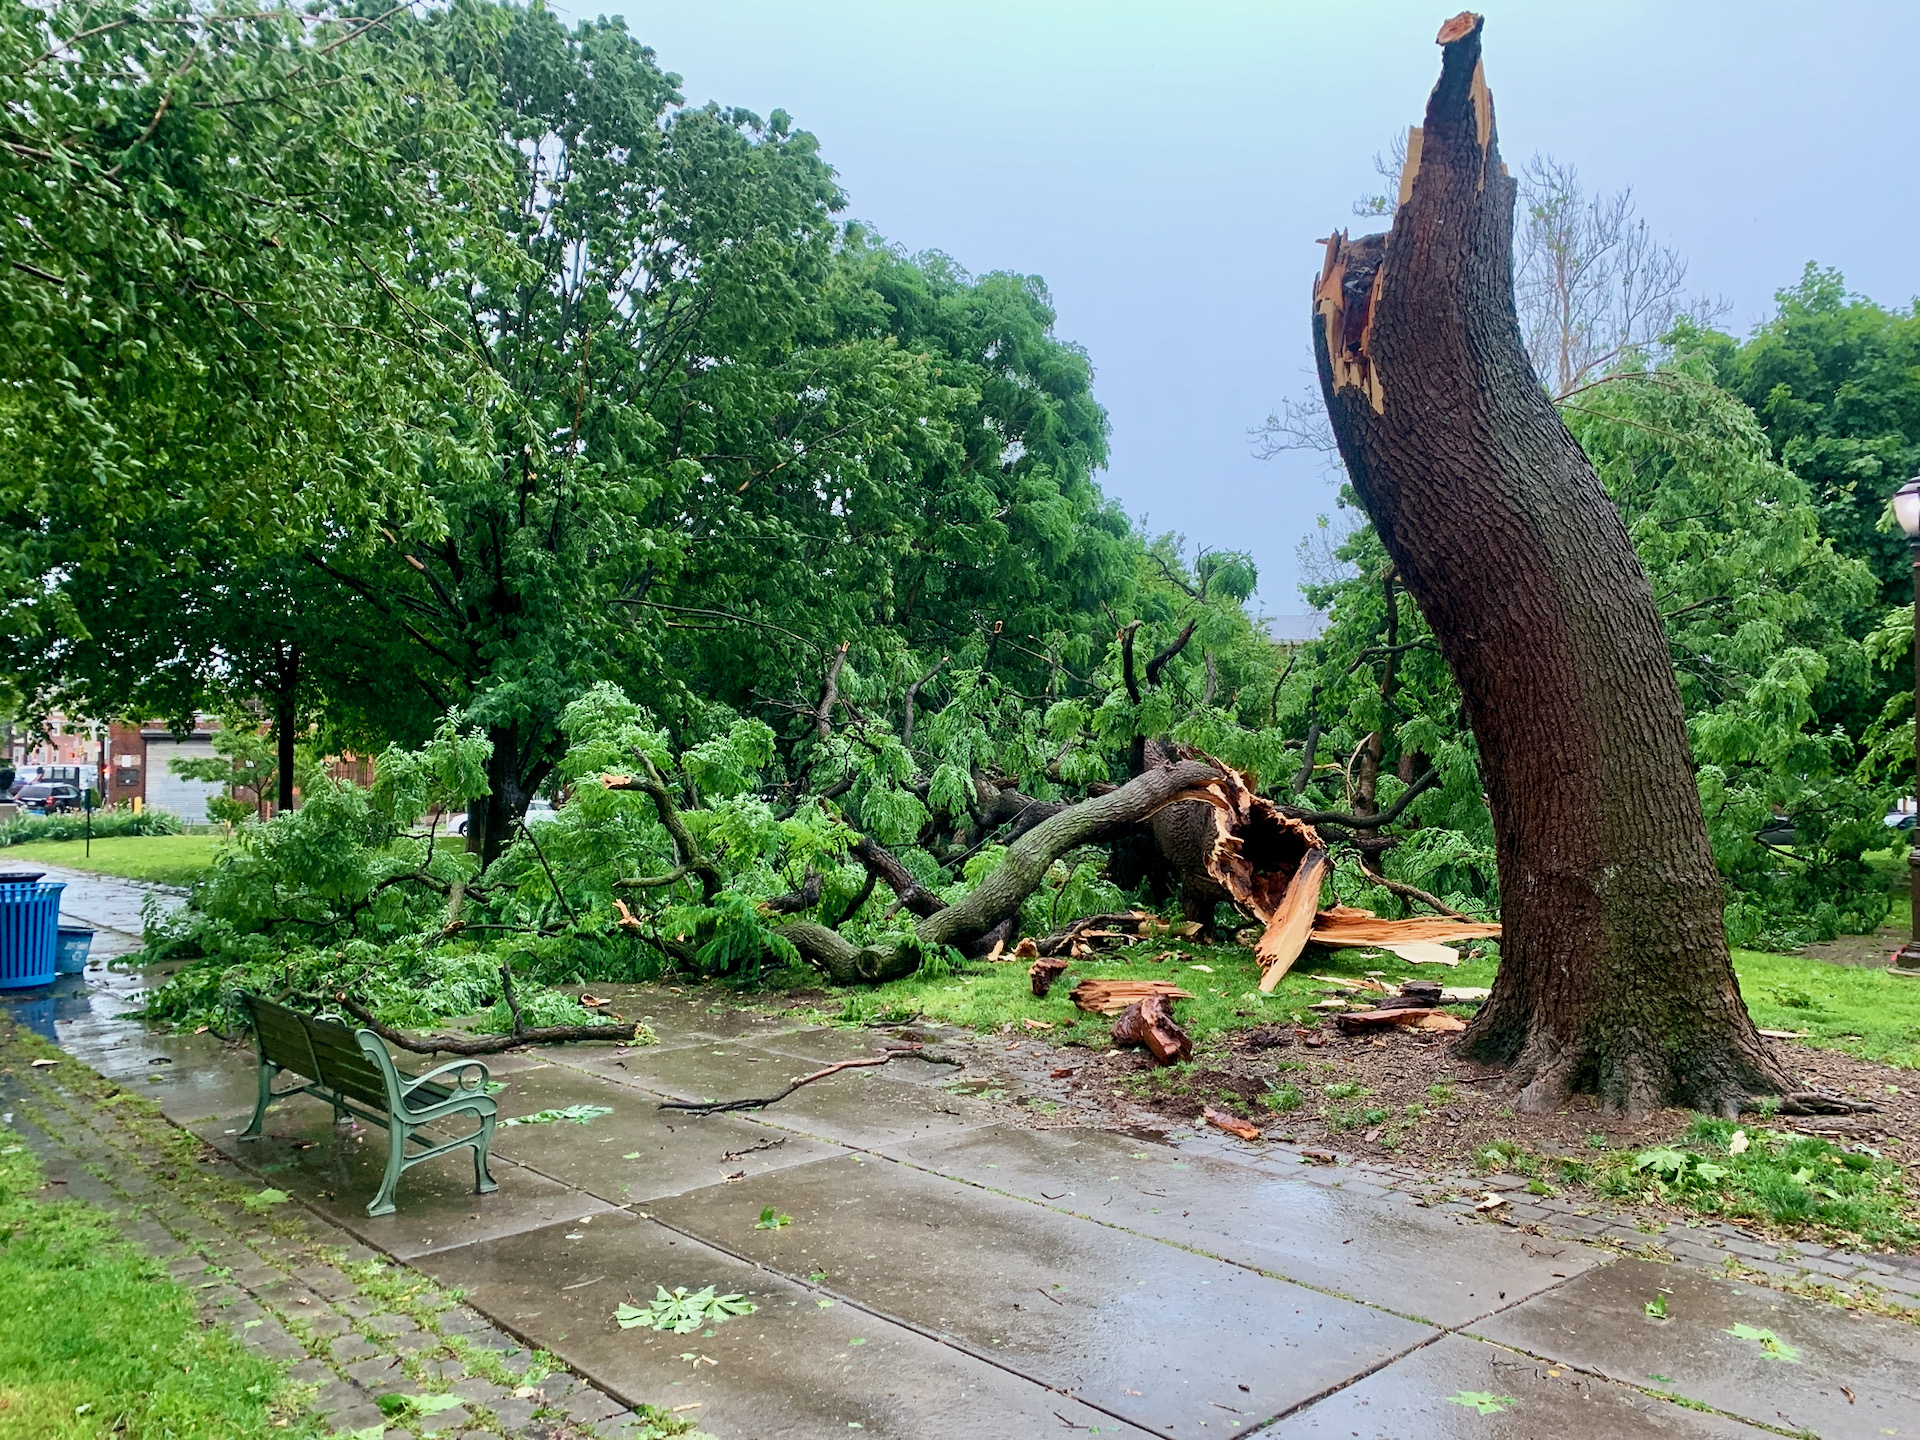 Kentucky Coffee Tree destroyed in storm